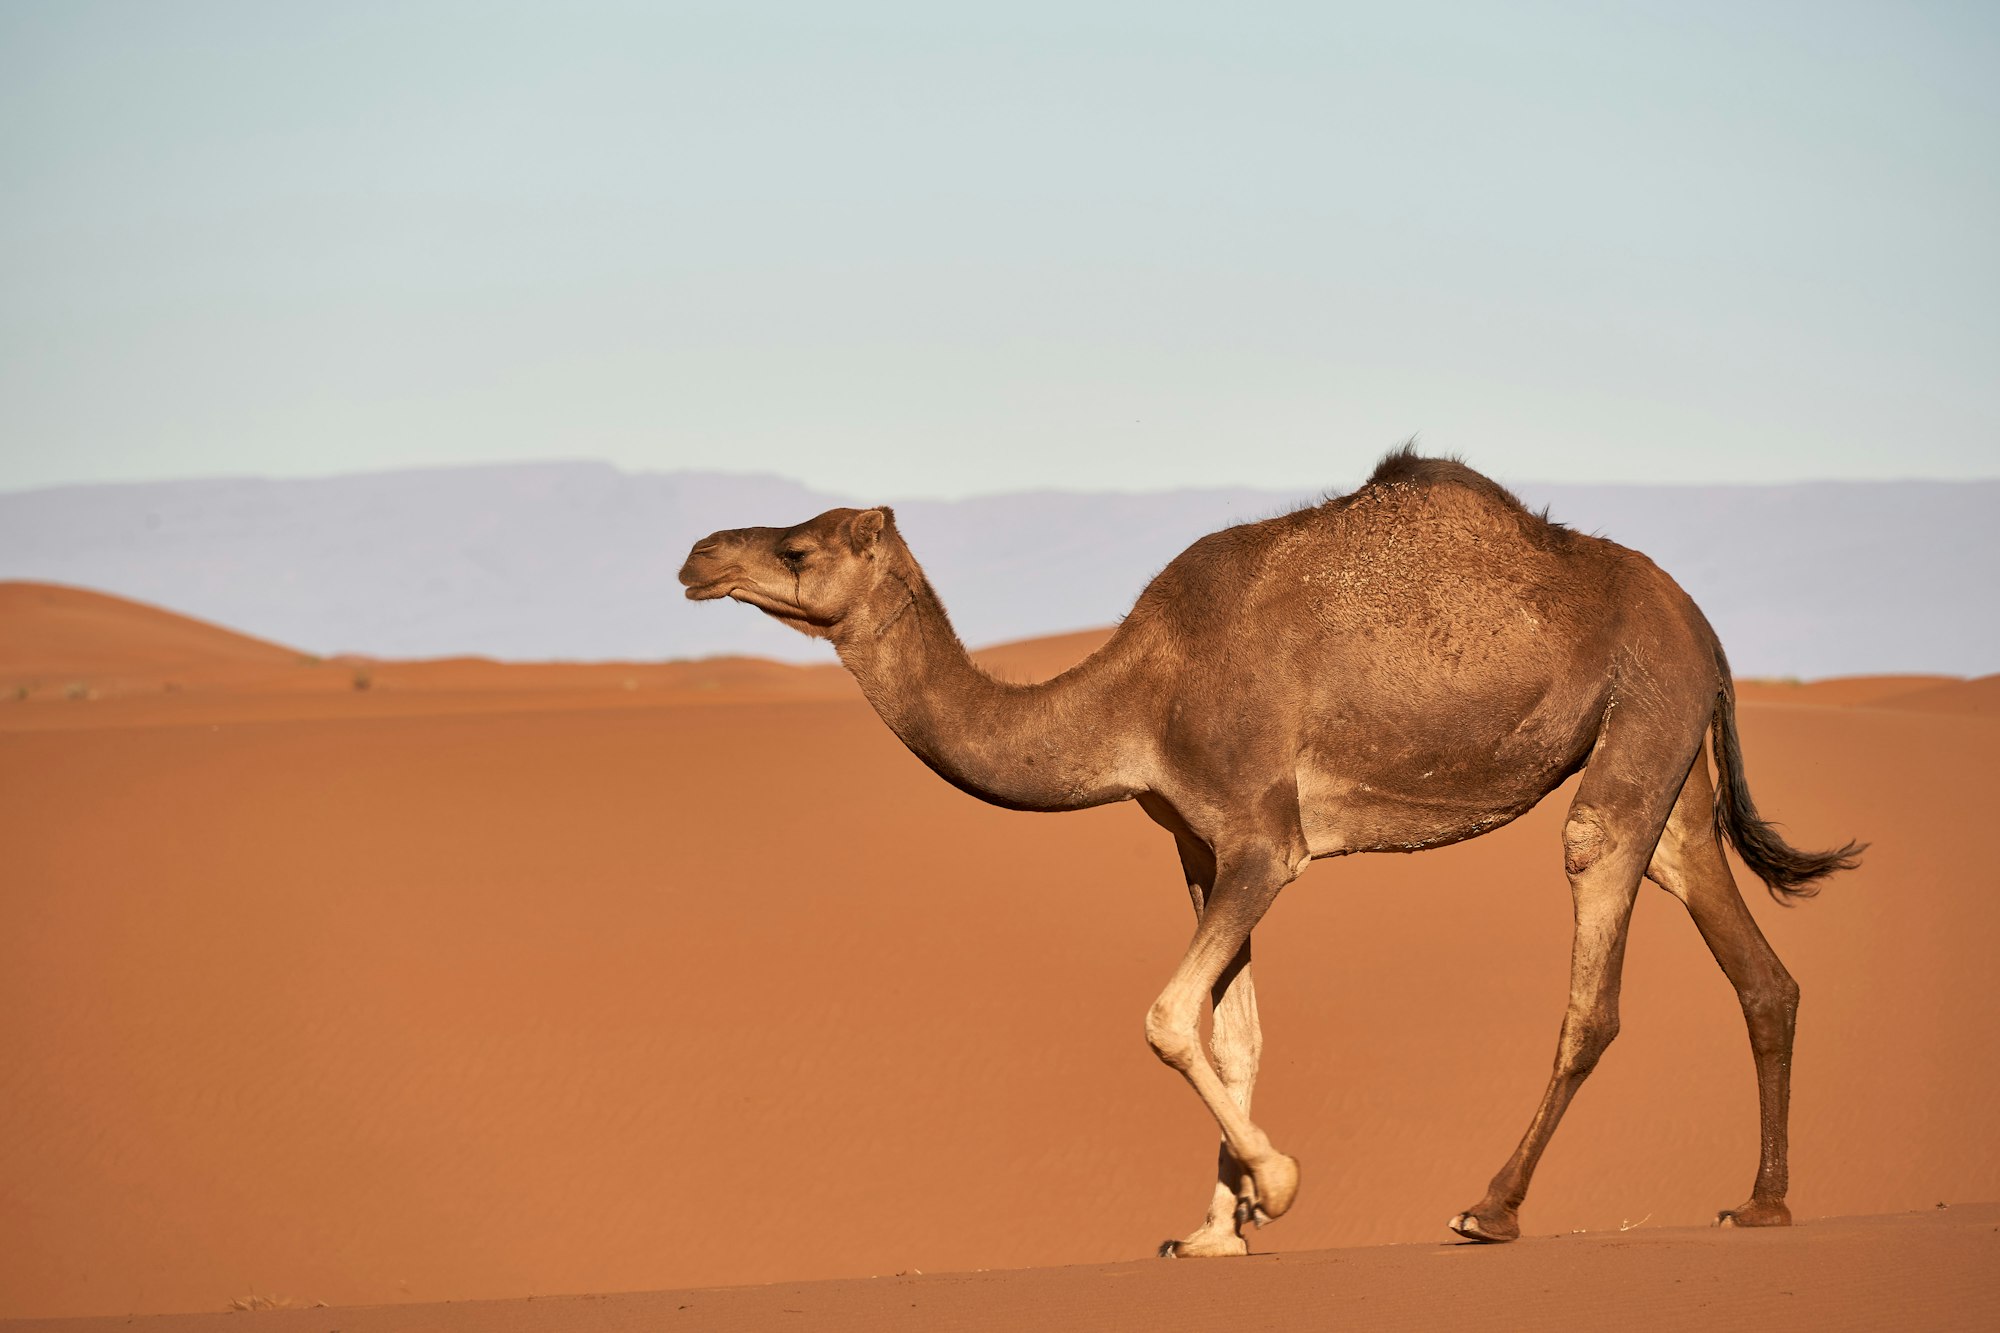 What Does a Camel Hide in its Hump?